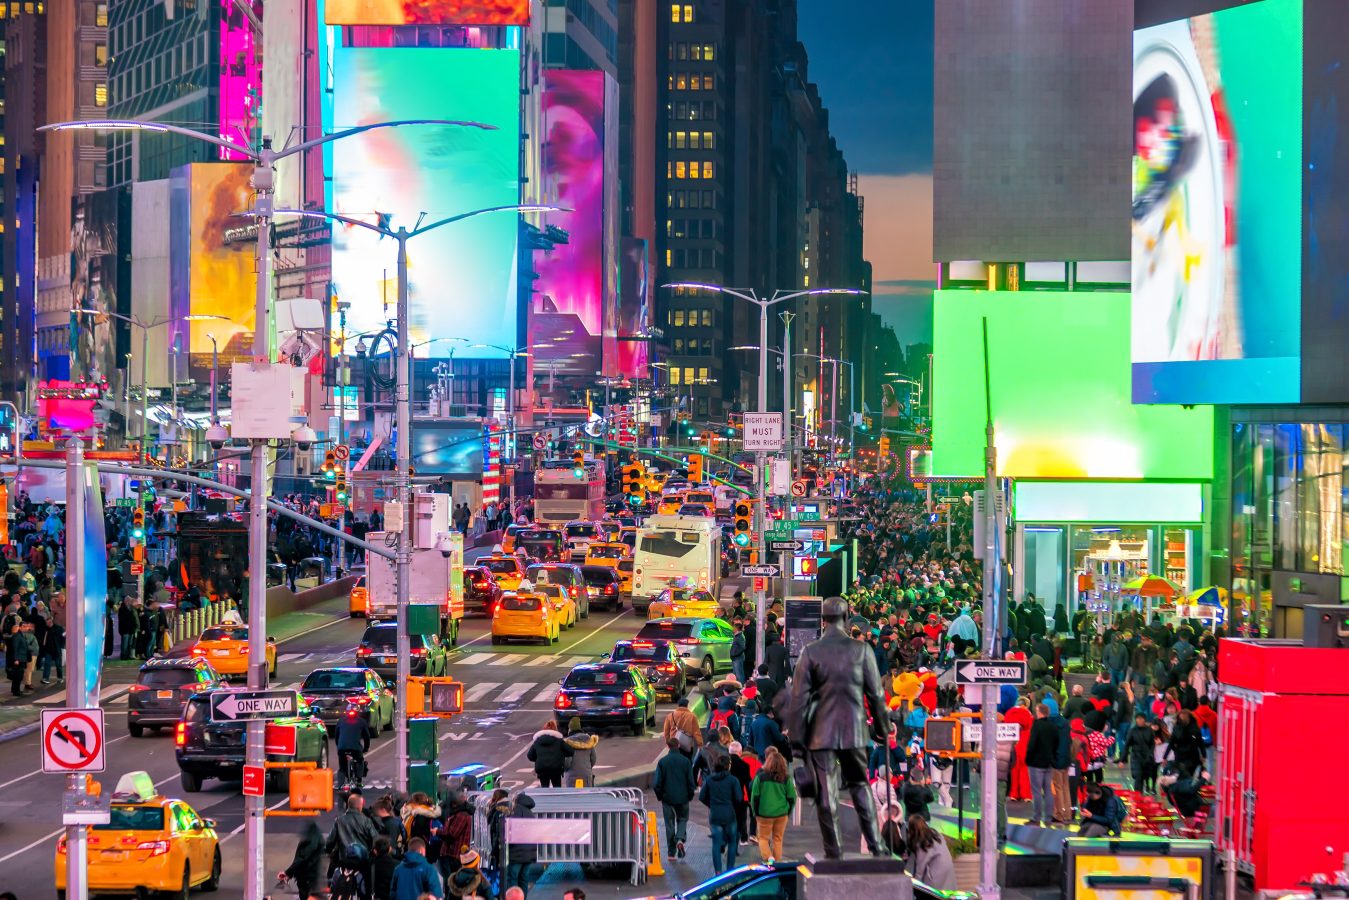 Times Square area with neon art and commerce, Manhattan, New York City, United States.